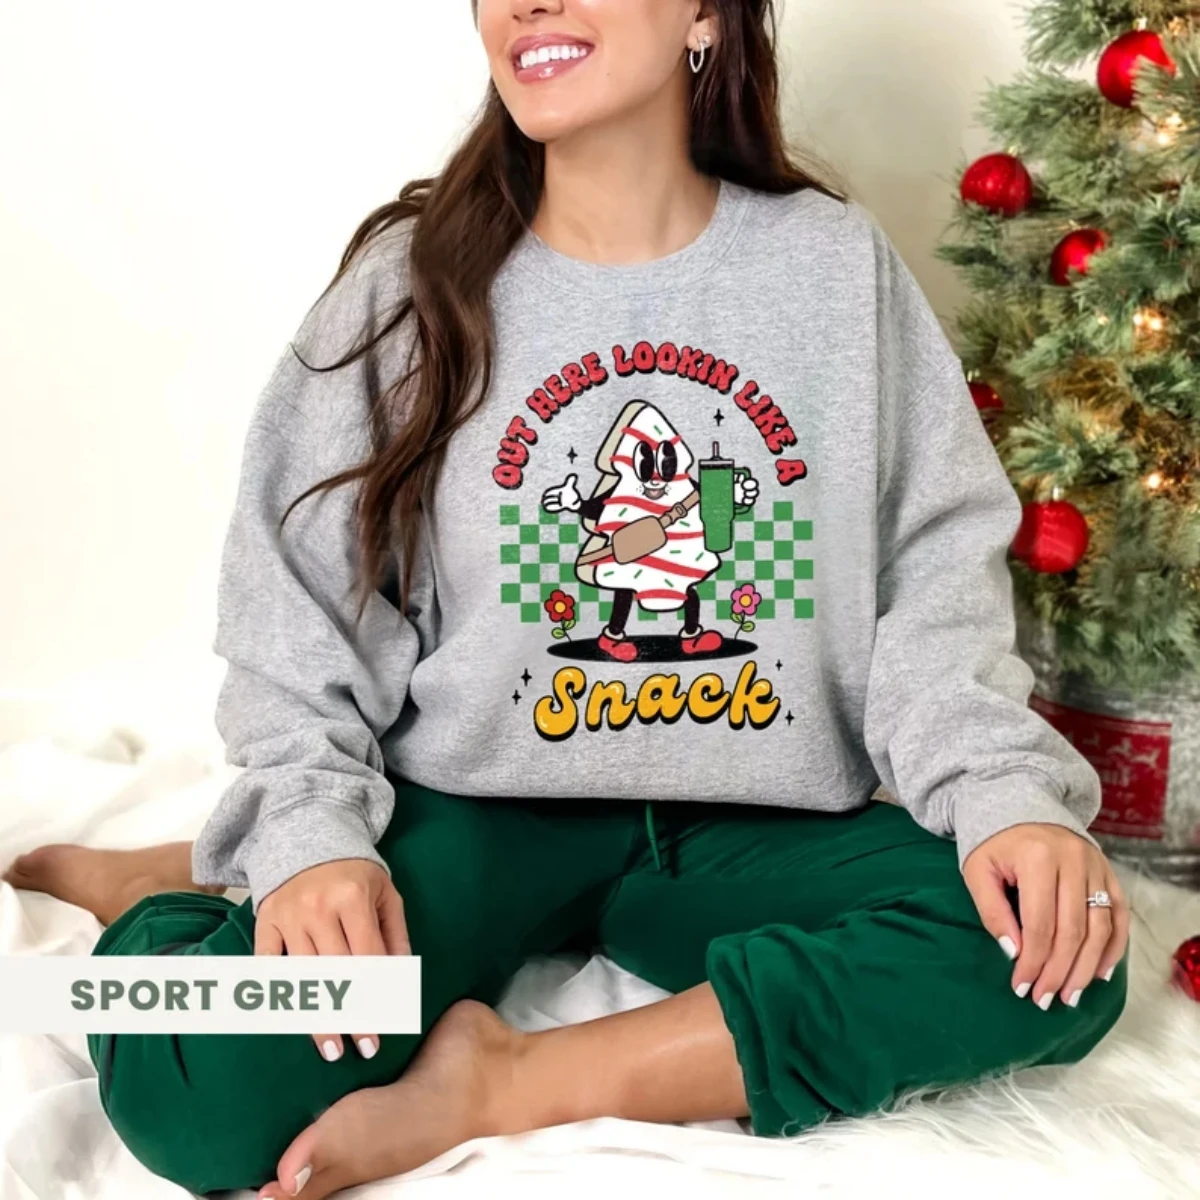 Funny Christmas Sweatshirt Out Here Looking Like A Snack Cake Pullover Shirt Little Debbie Christmas Tree Cake Winter Clothes